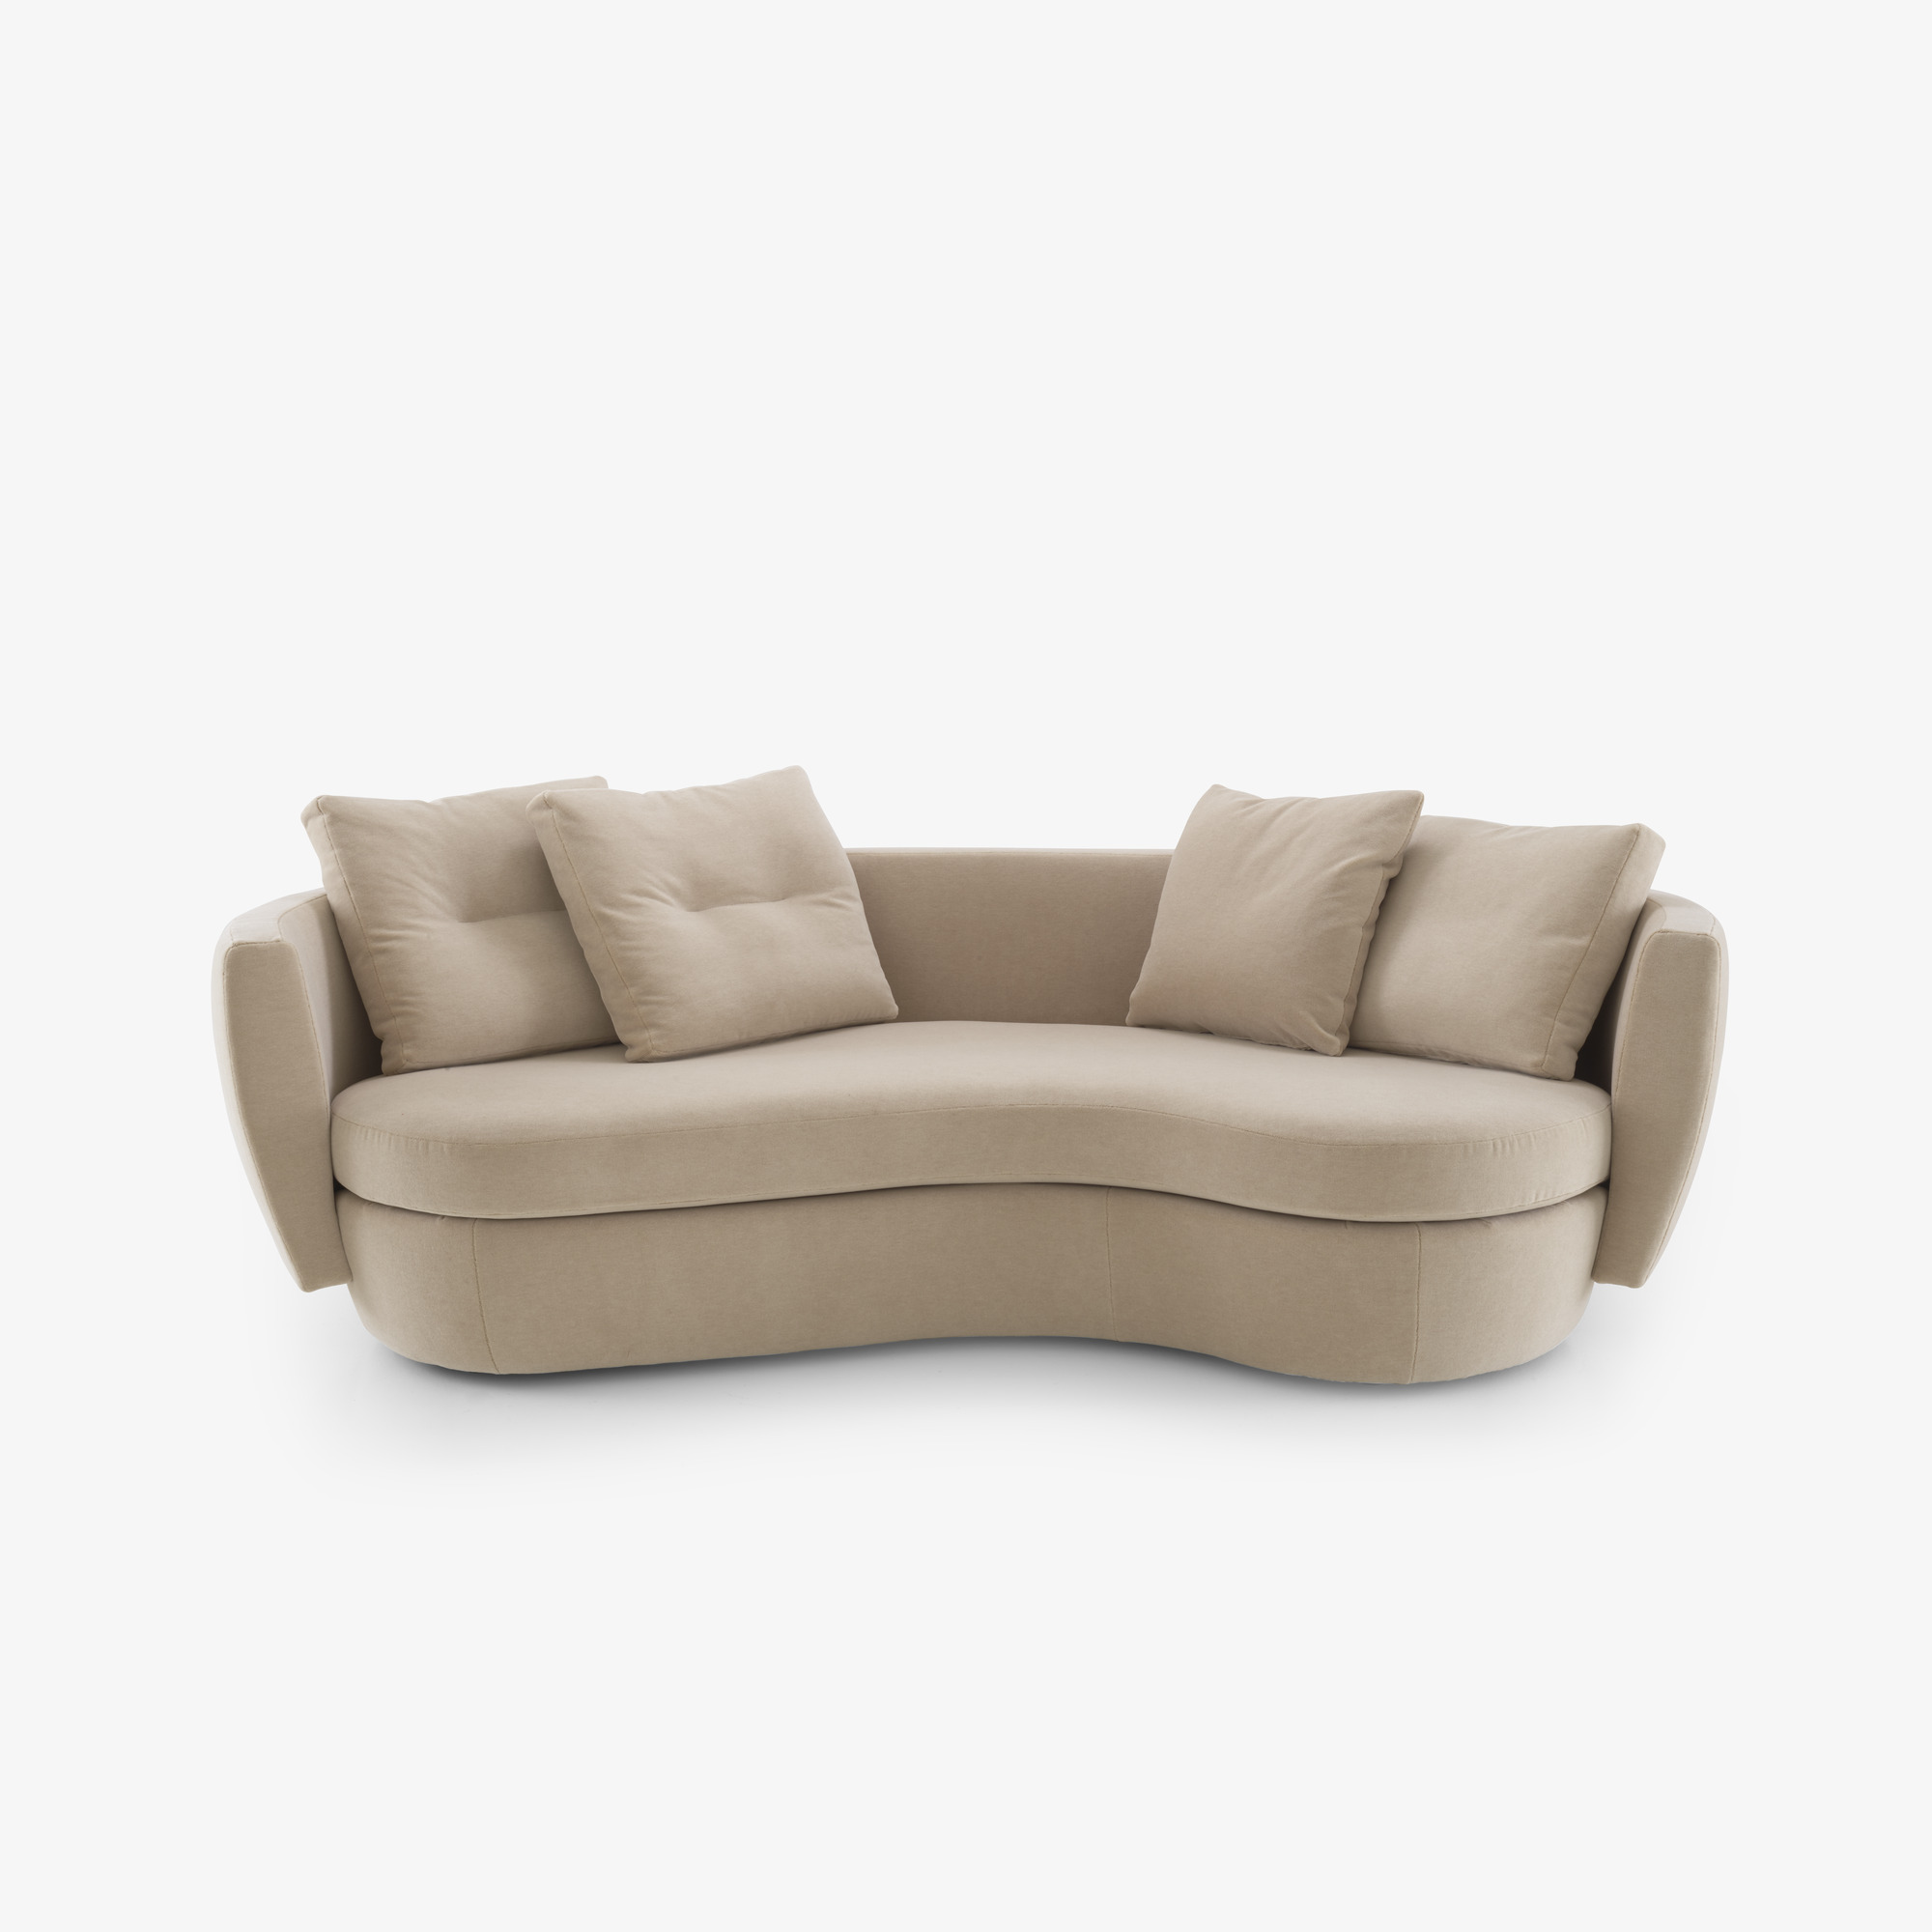 Image CURVED SETTEE COMPLETE ITEM 